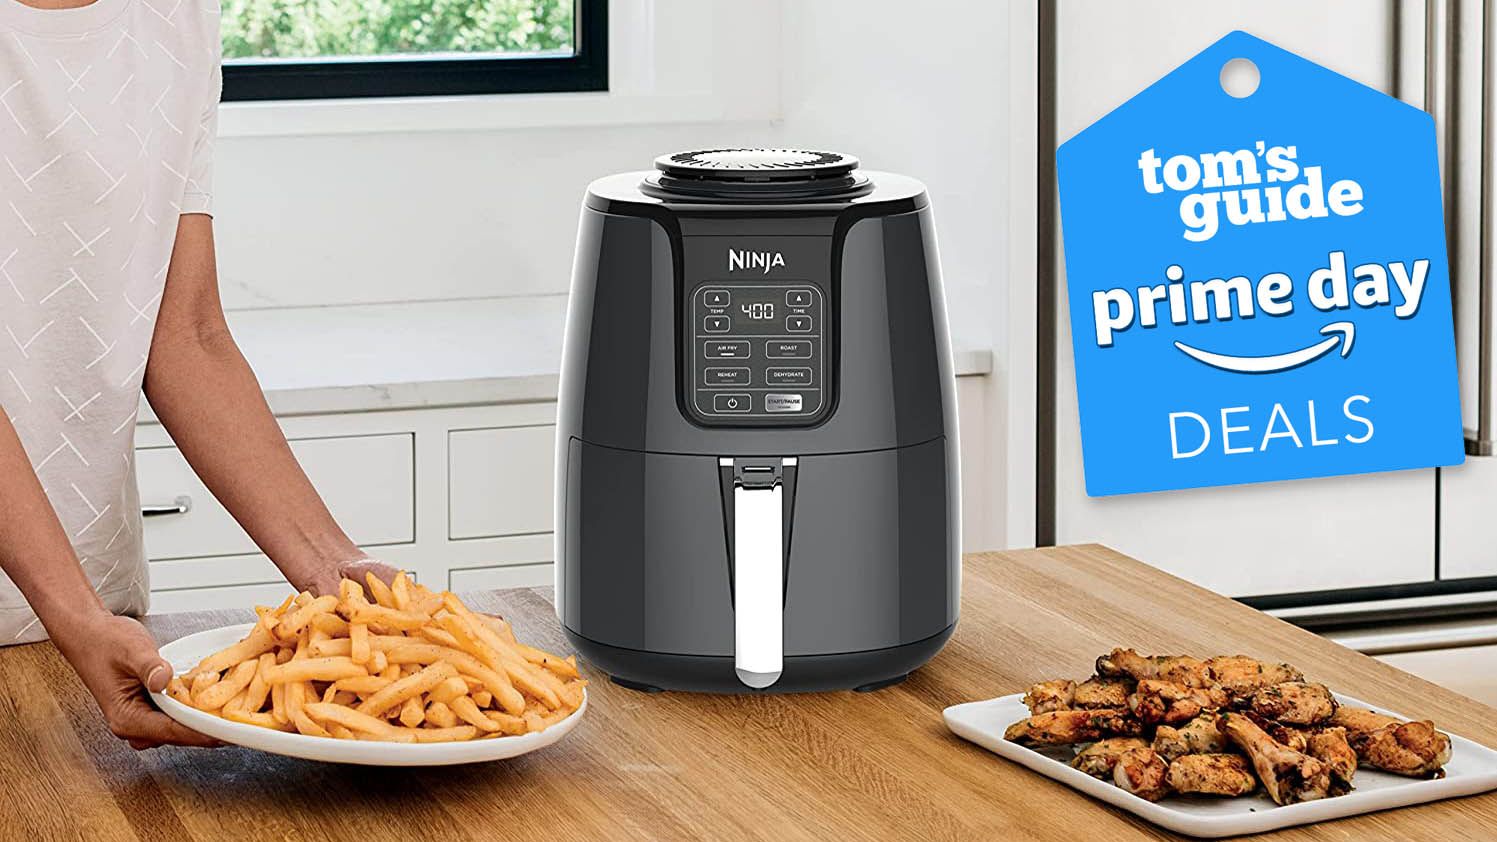 Prime Day air fryer deals don’t come much cheaper than this Tom's Guide